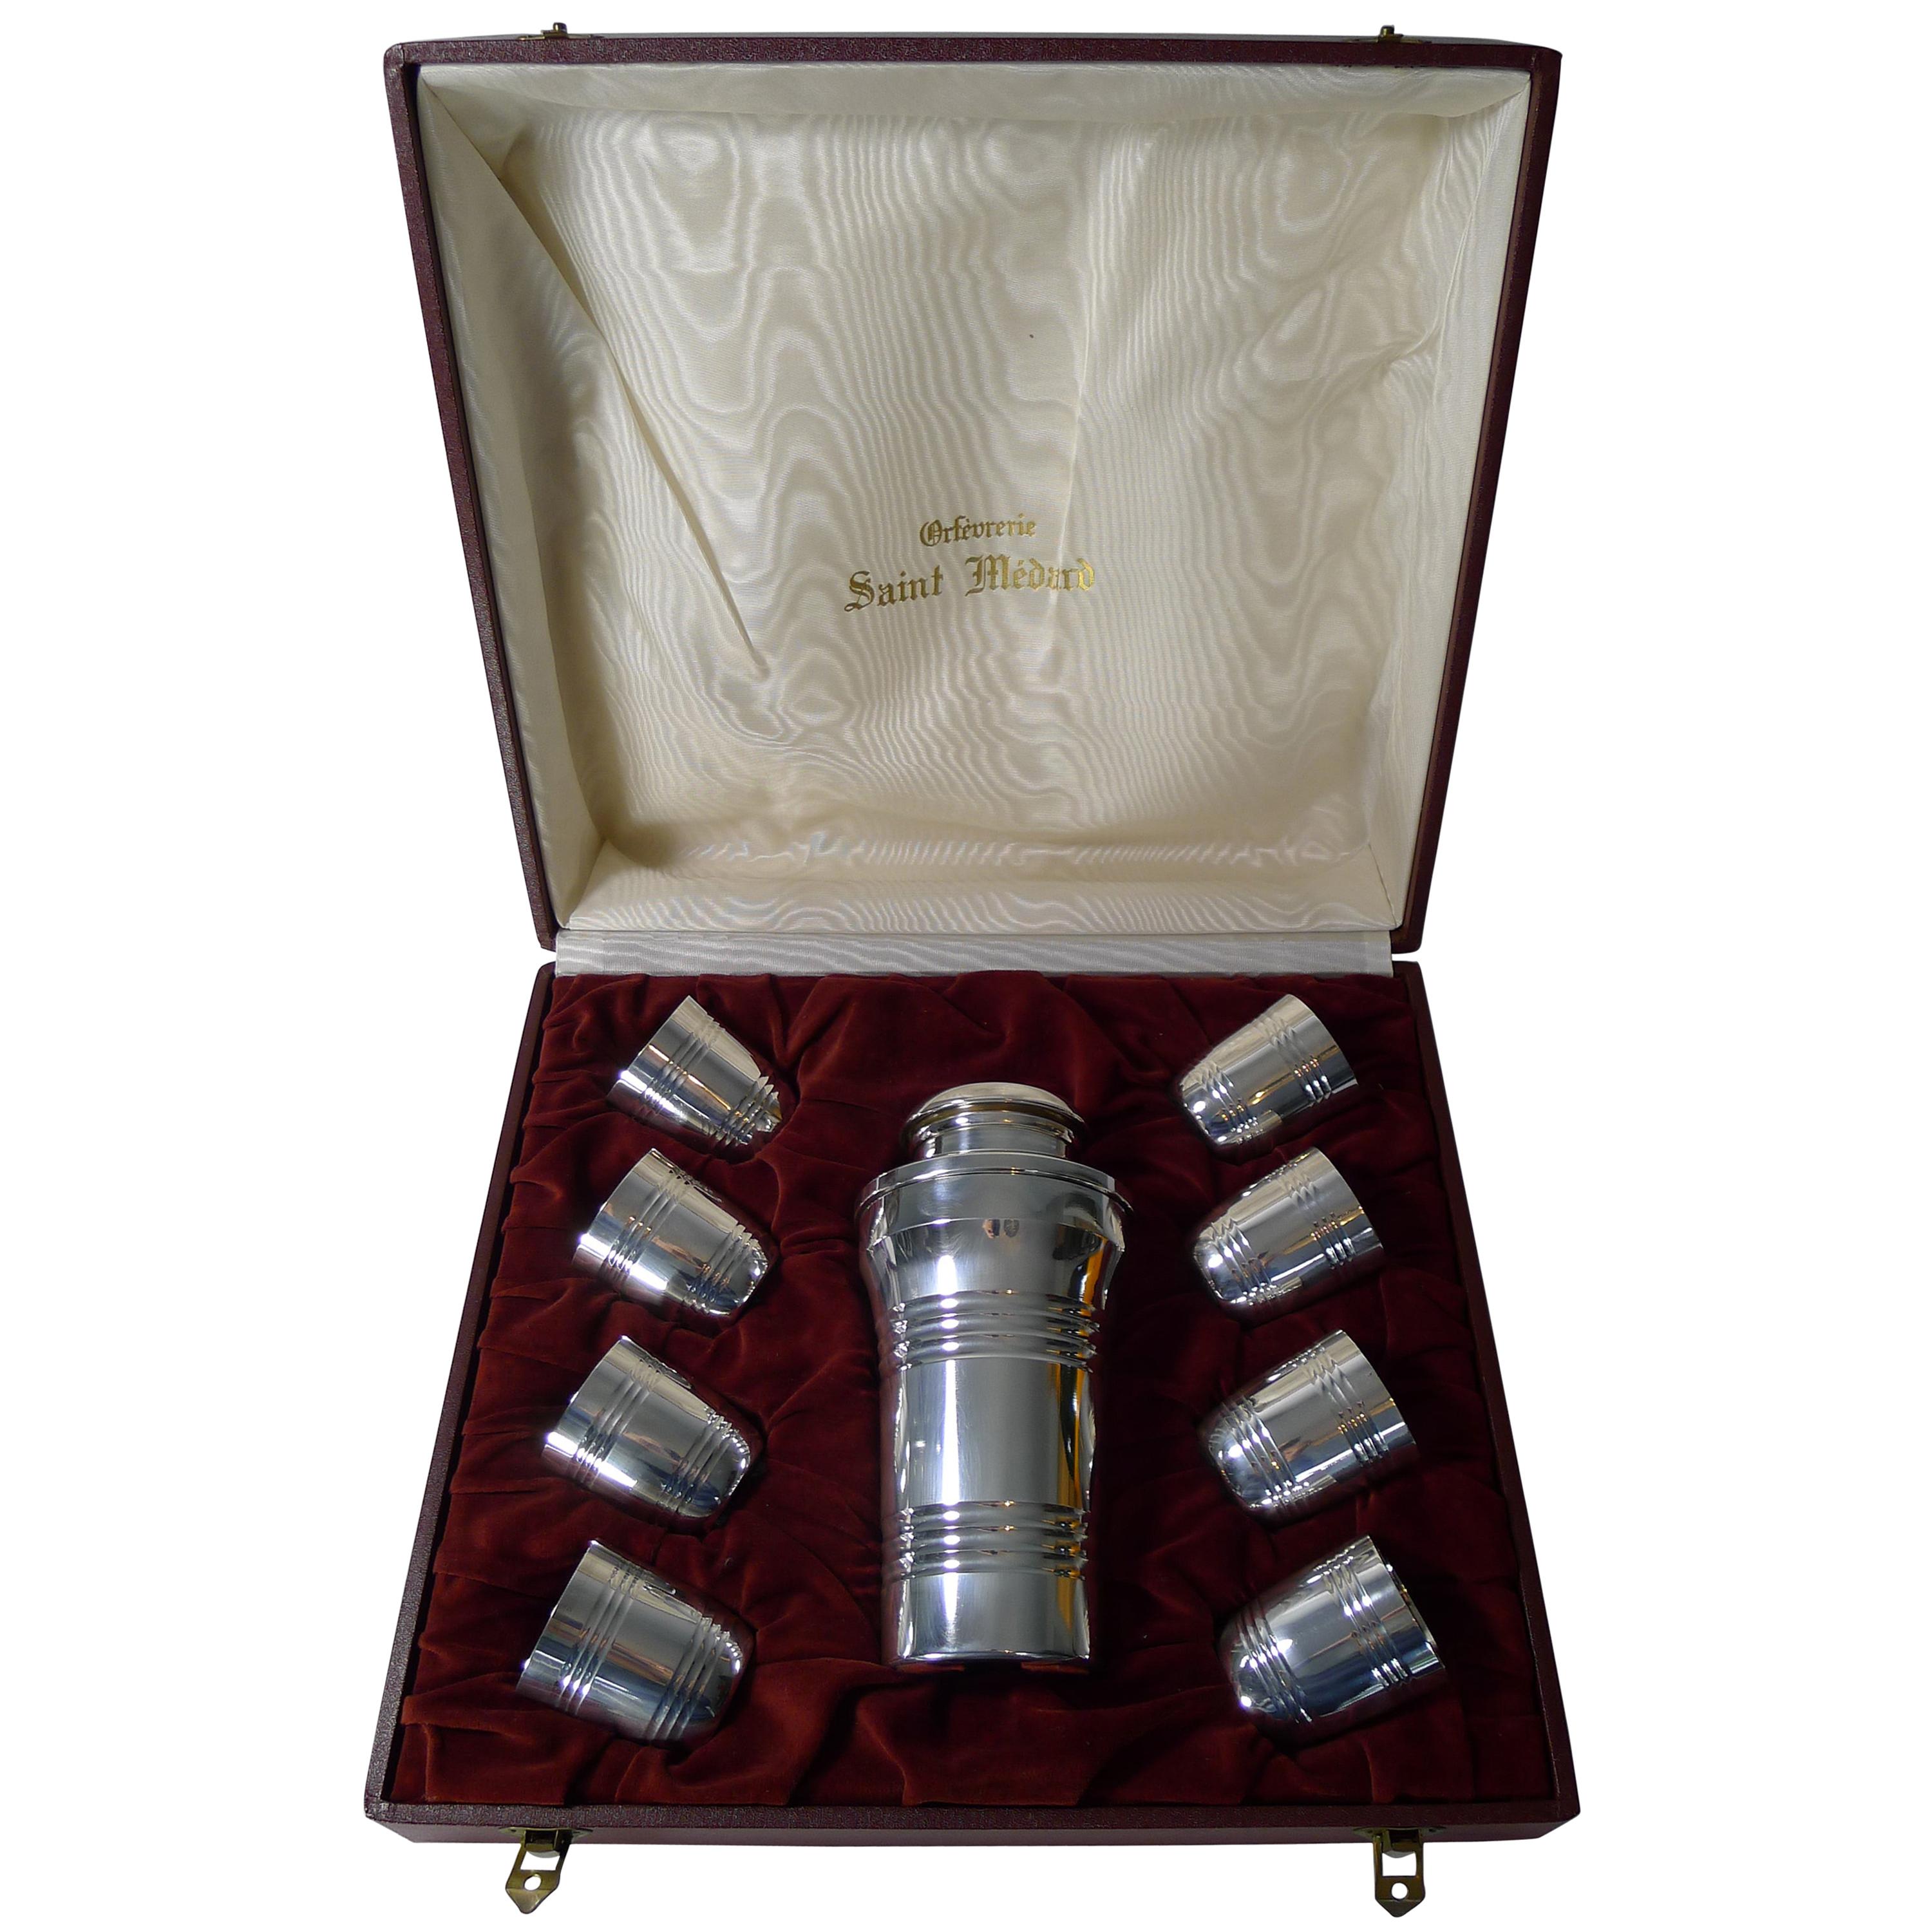 Cased French Art Deco Cocktail Shaker Set by St. Medard, Paris, circa 1940